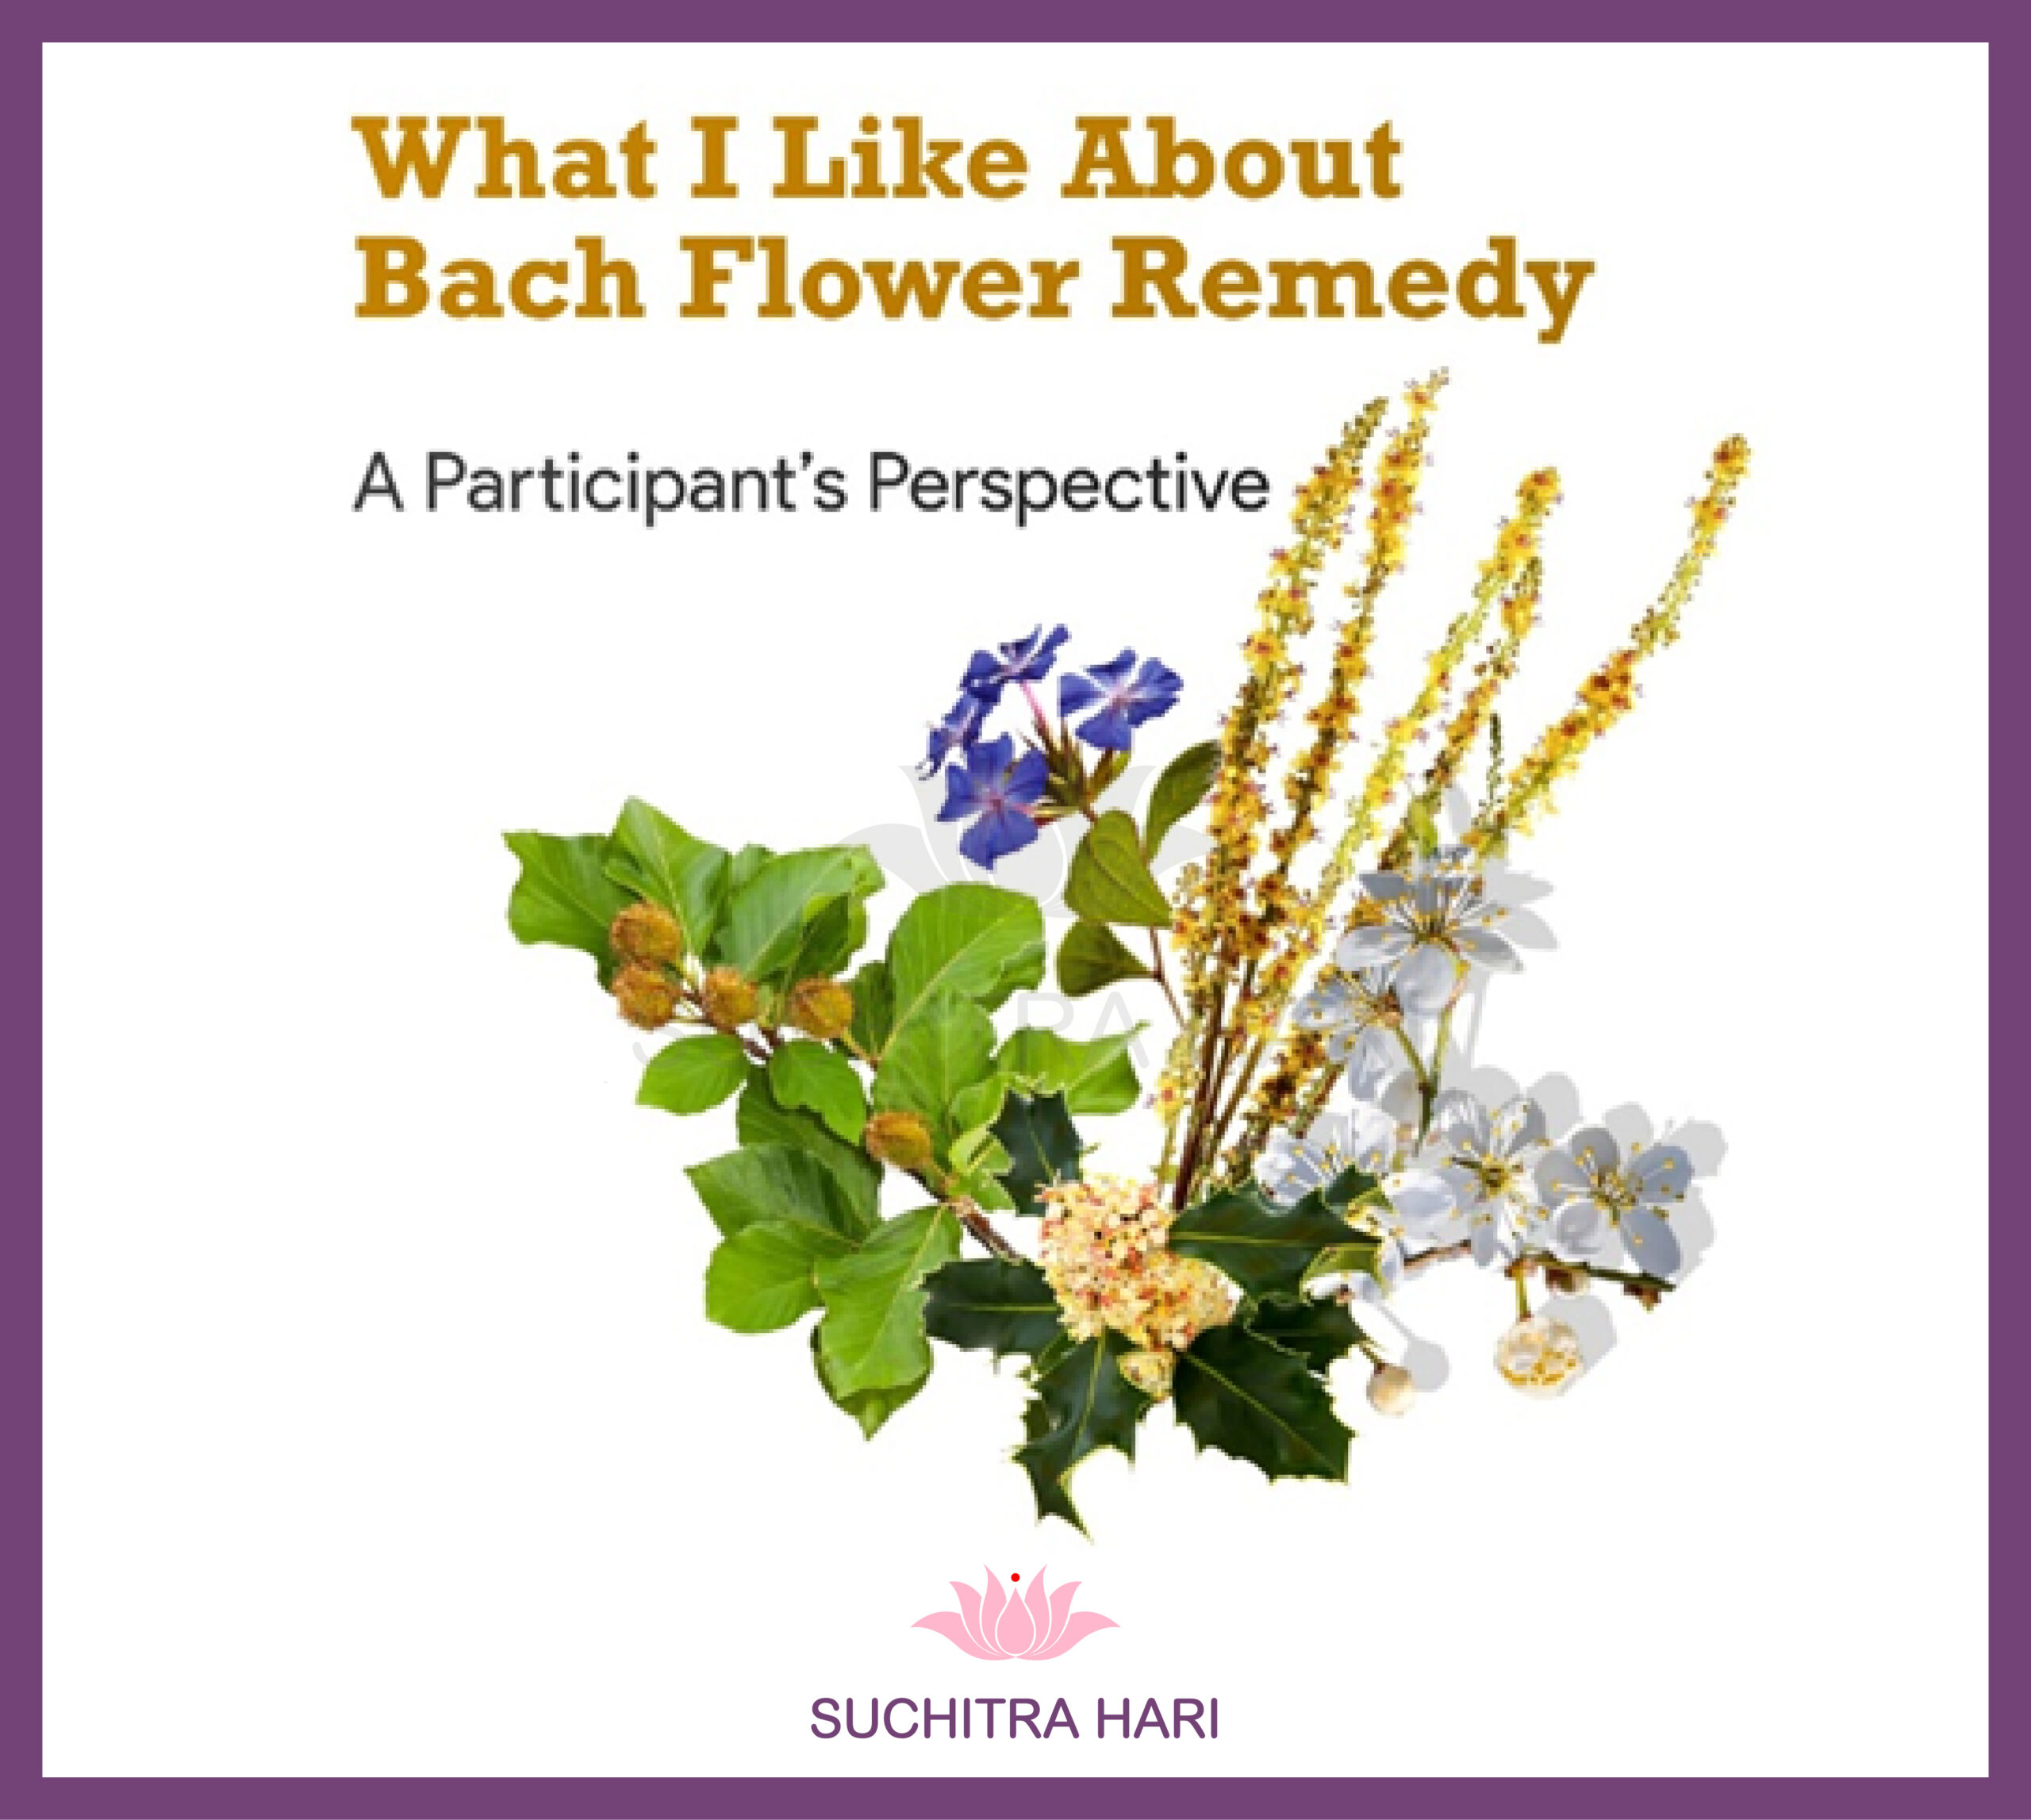 What I like about Bach Flower Remedies?